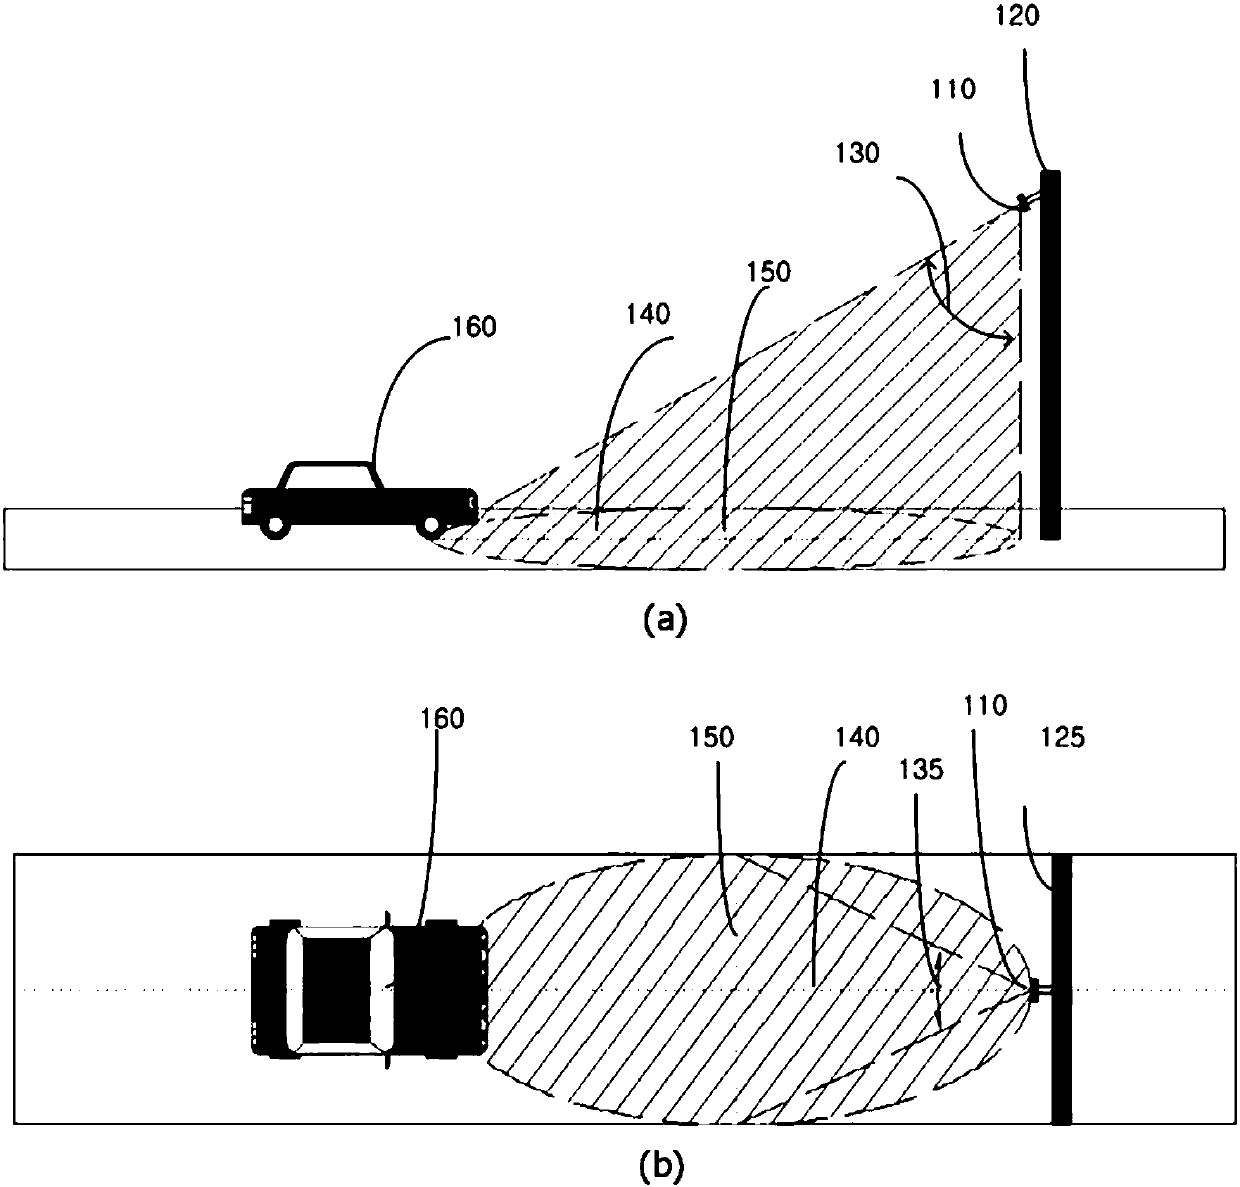 Indoor mirror device with dedicated vehicle terminal for near-field communication